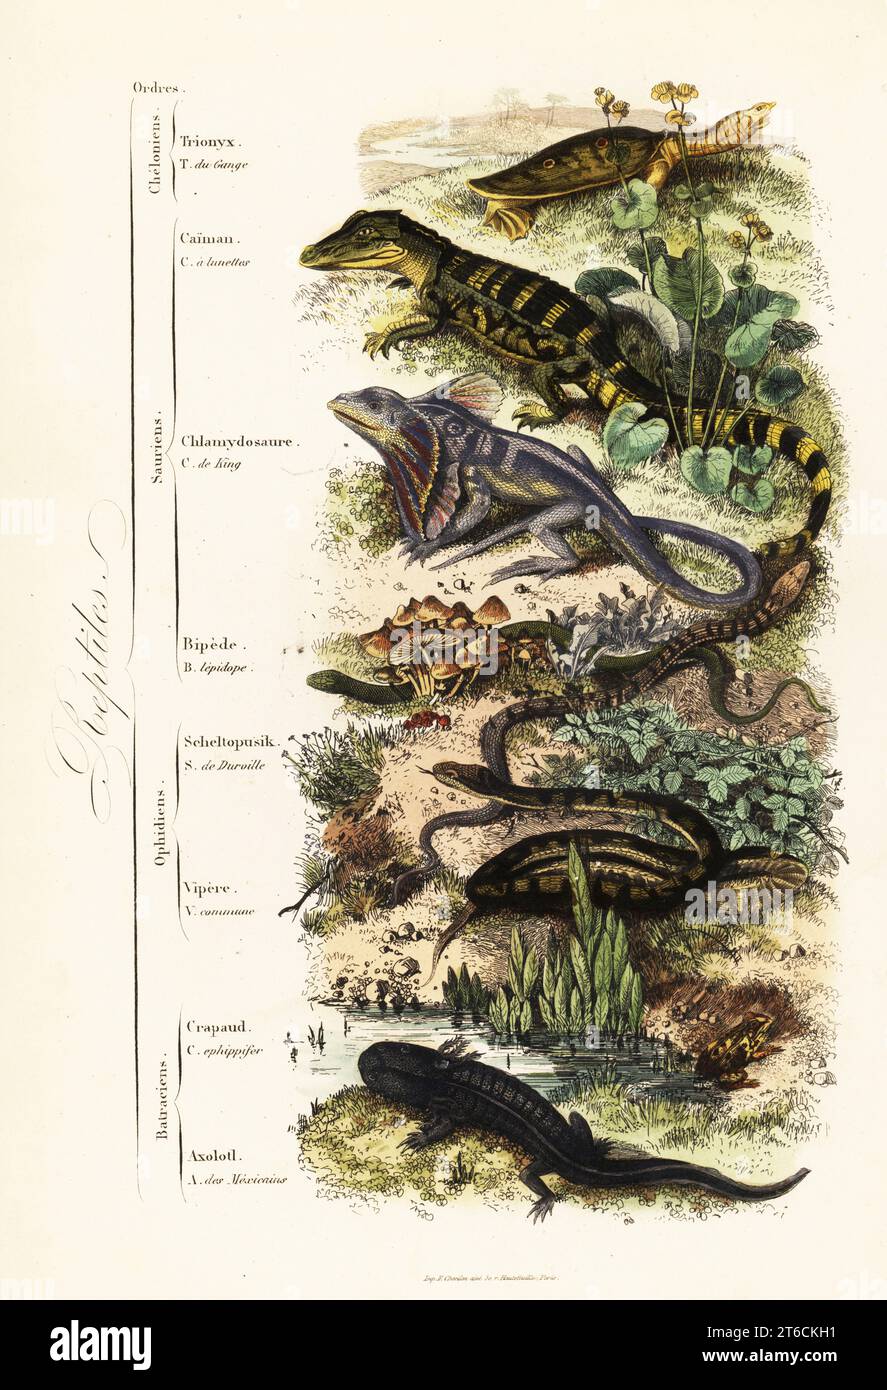 Orders of reptiles: vulnerable Indian softshell turtle, Nilssonia gangetica, spectacled caiman, Caiman crocodilus, frilled-necked lizard, Chlamydosaurus kingii, common scaly foot, Pygopus lepidopudus, European glass lizard, Pseudopus apodus, common viper, Vipera berus, Physalaemus ephippifer frog, and critically endangered axolotl, Ambystoma mexicanum. Trionyx du Gange, Caiman a lunettes, Chlamydosaure de King, Bipede lepidope, Scheltopusik de Durville, Vipere comune, Crapaud ephippifer, Axolotl des Mexicains. Handcoloured steel engraving printed by F. Chardon from Achille Comtes Musee dHistoi Stock Photo